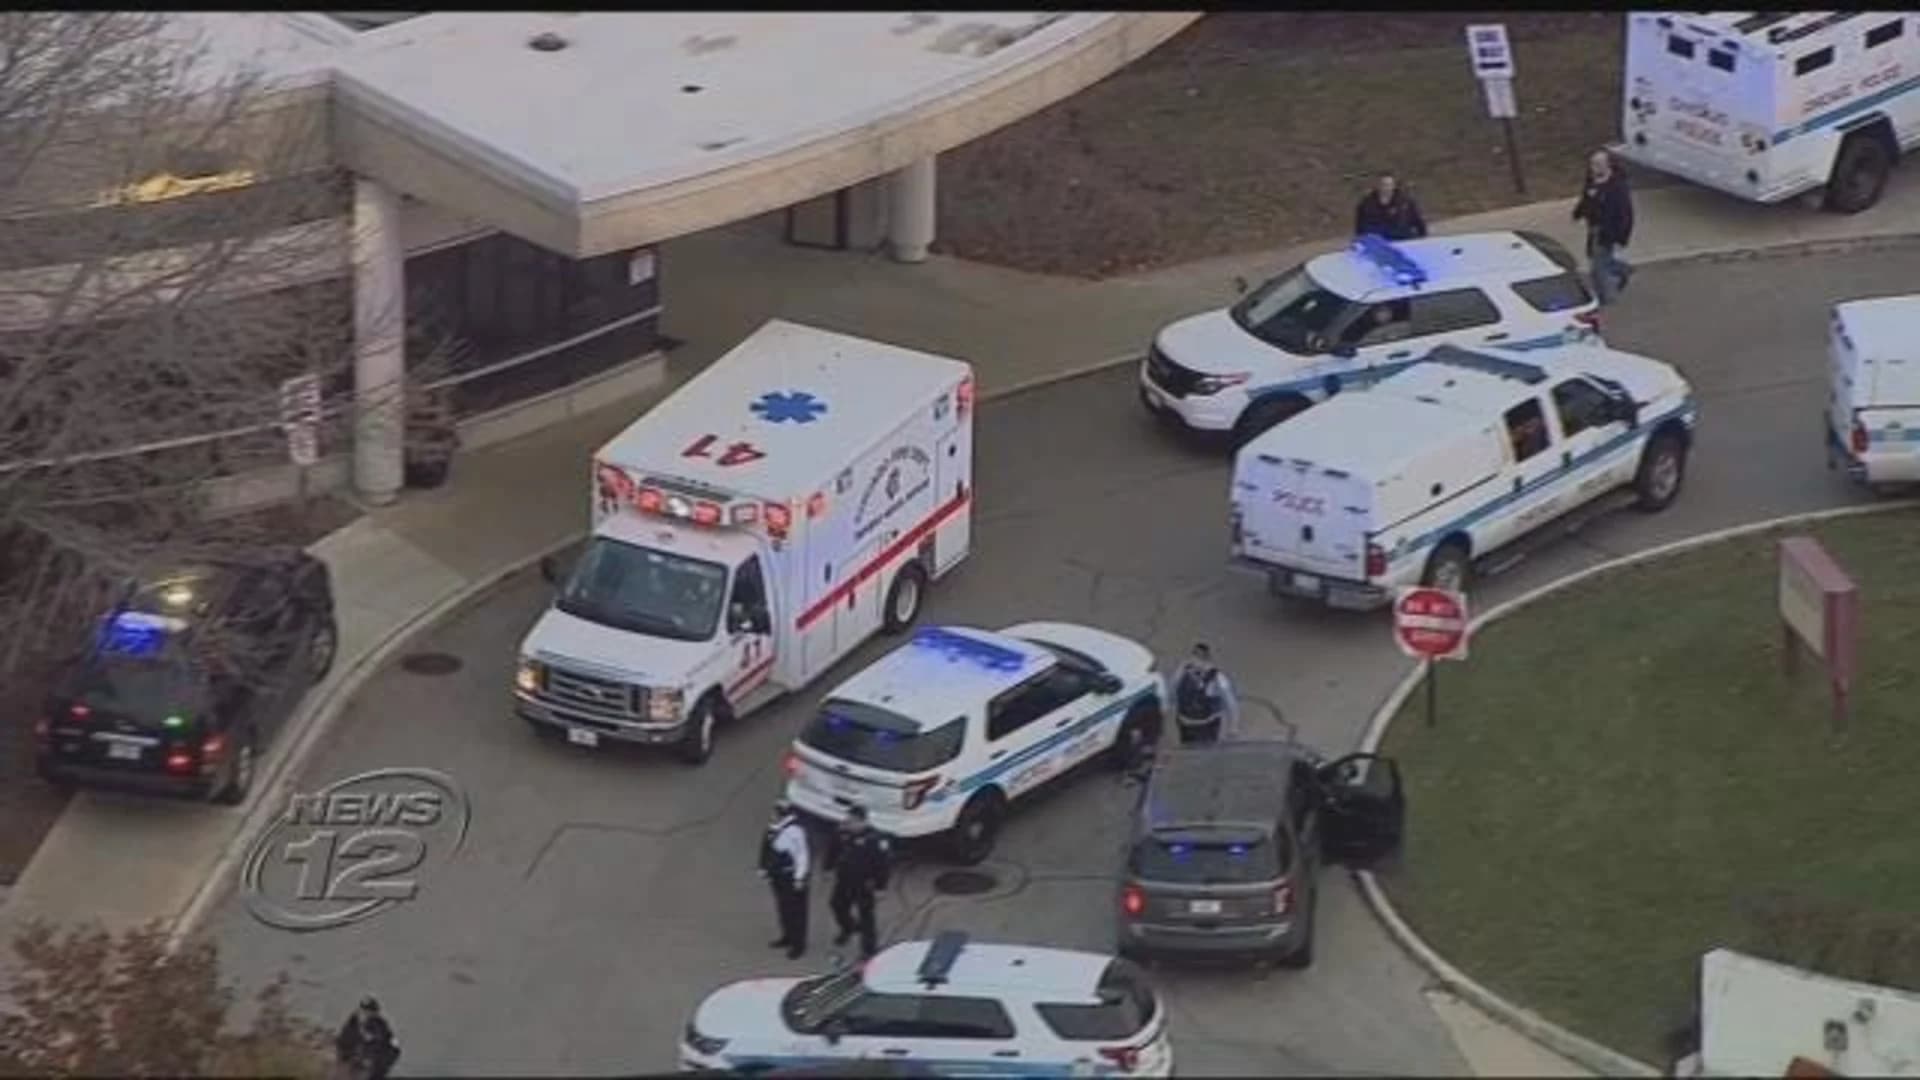 Gunman opens fire at Chicago hospital, kills at least 3